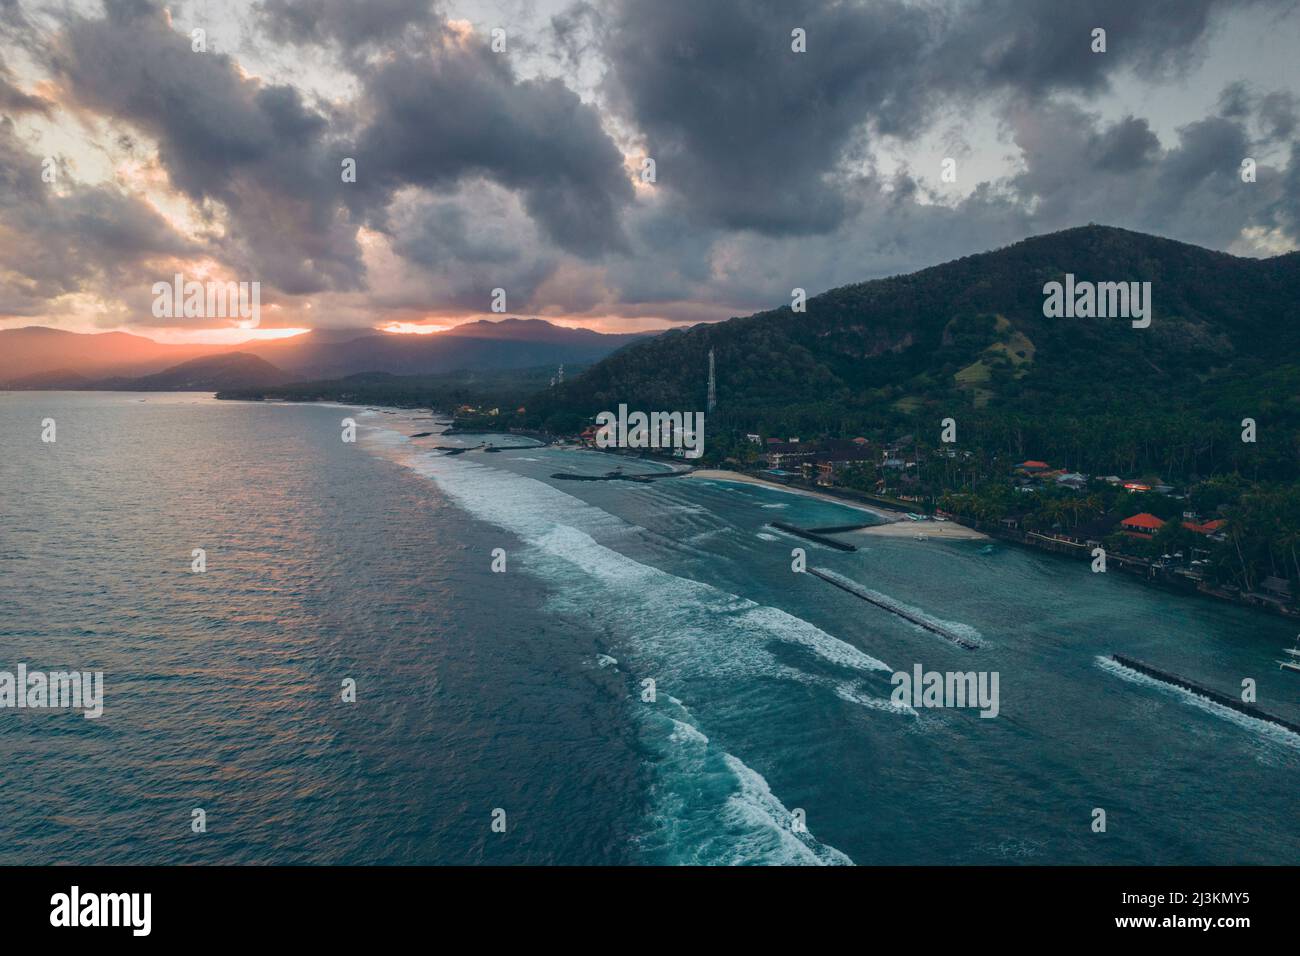 Aerial view of the docks and breakwaters along the shore of Candidasa Beach with sunlight streaming across the mountaintops under a grey cloudy sky... Stock Photo